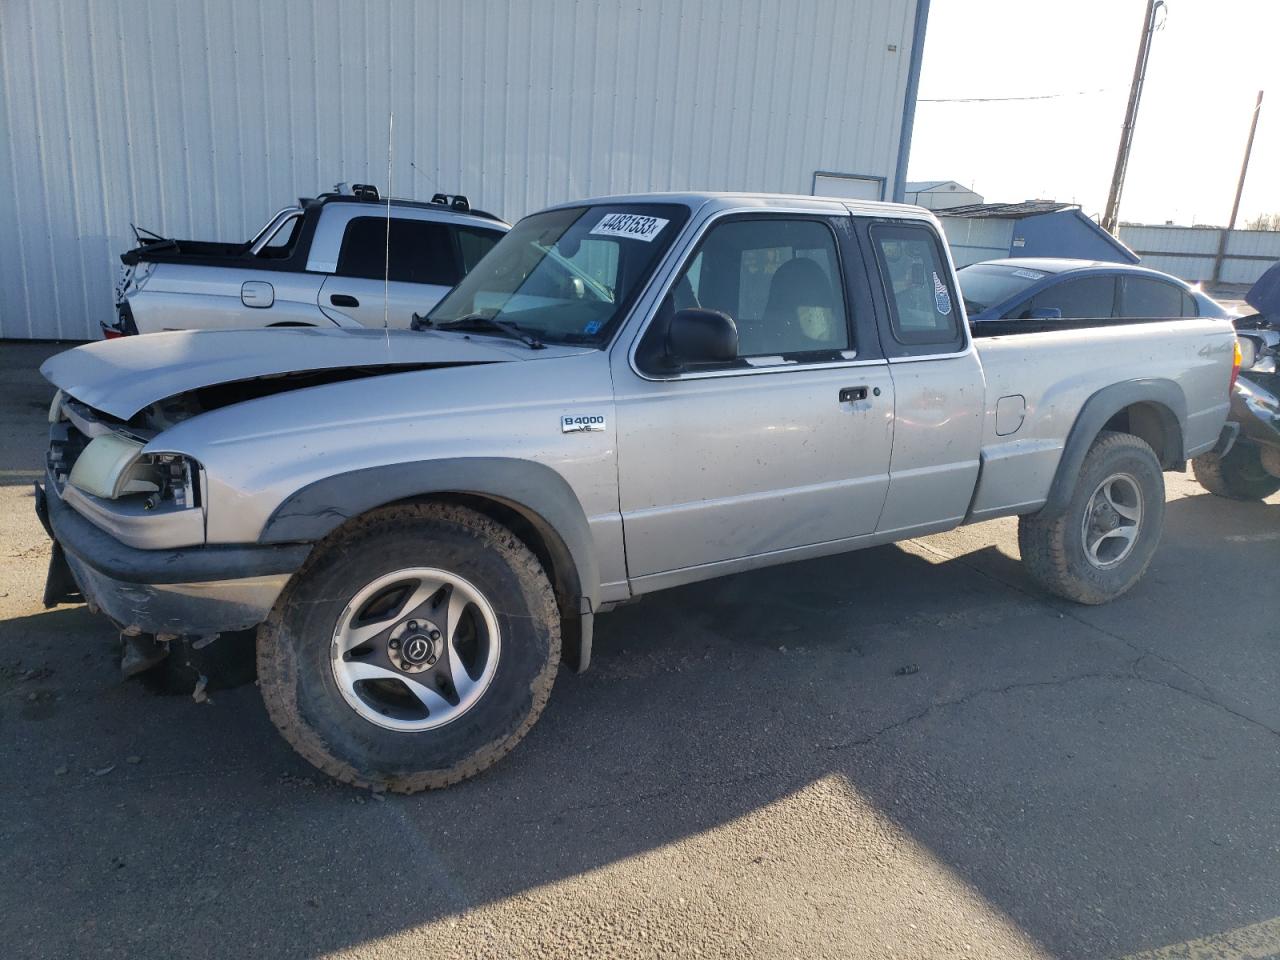 2003 Mazda B4000 Cab Plus for sale at Copart Nampa, ID. Lot #44831*** |  SalvageAutosAuction.com